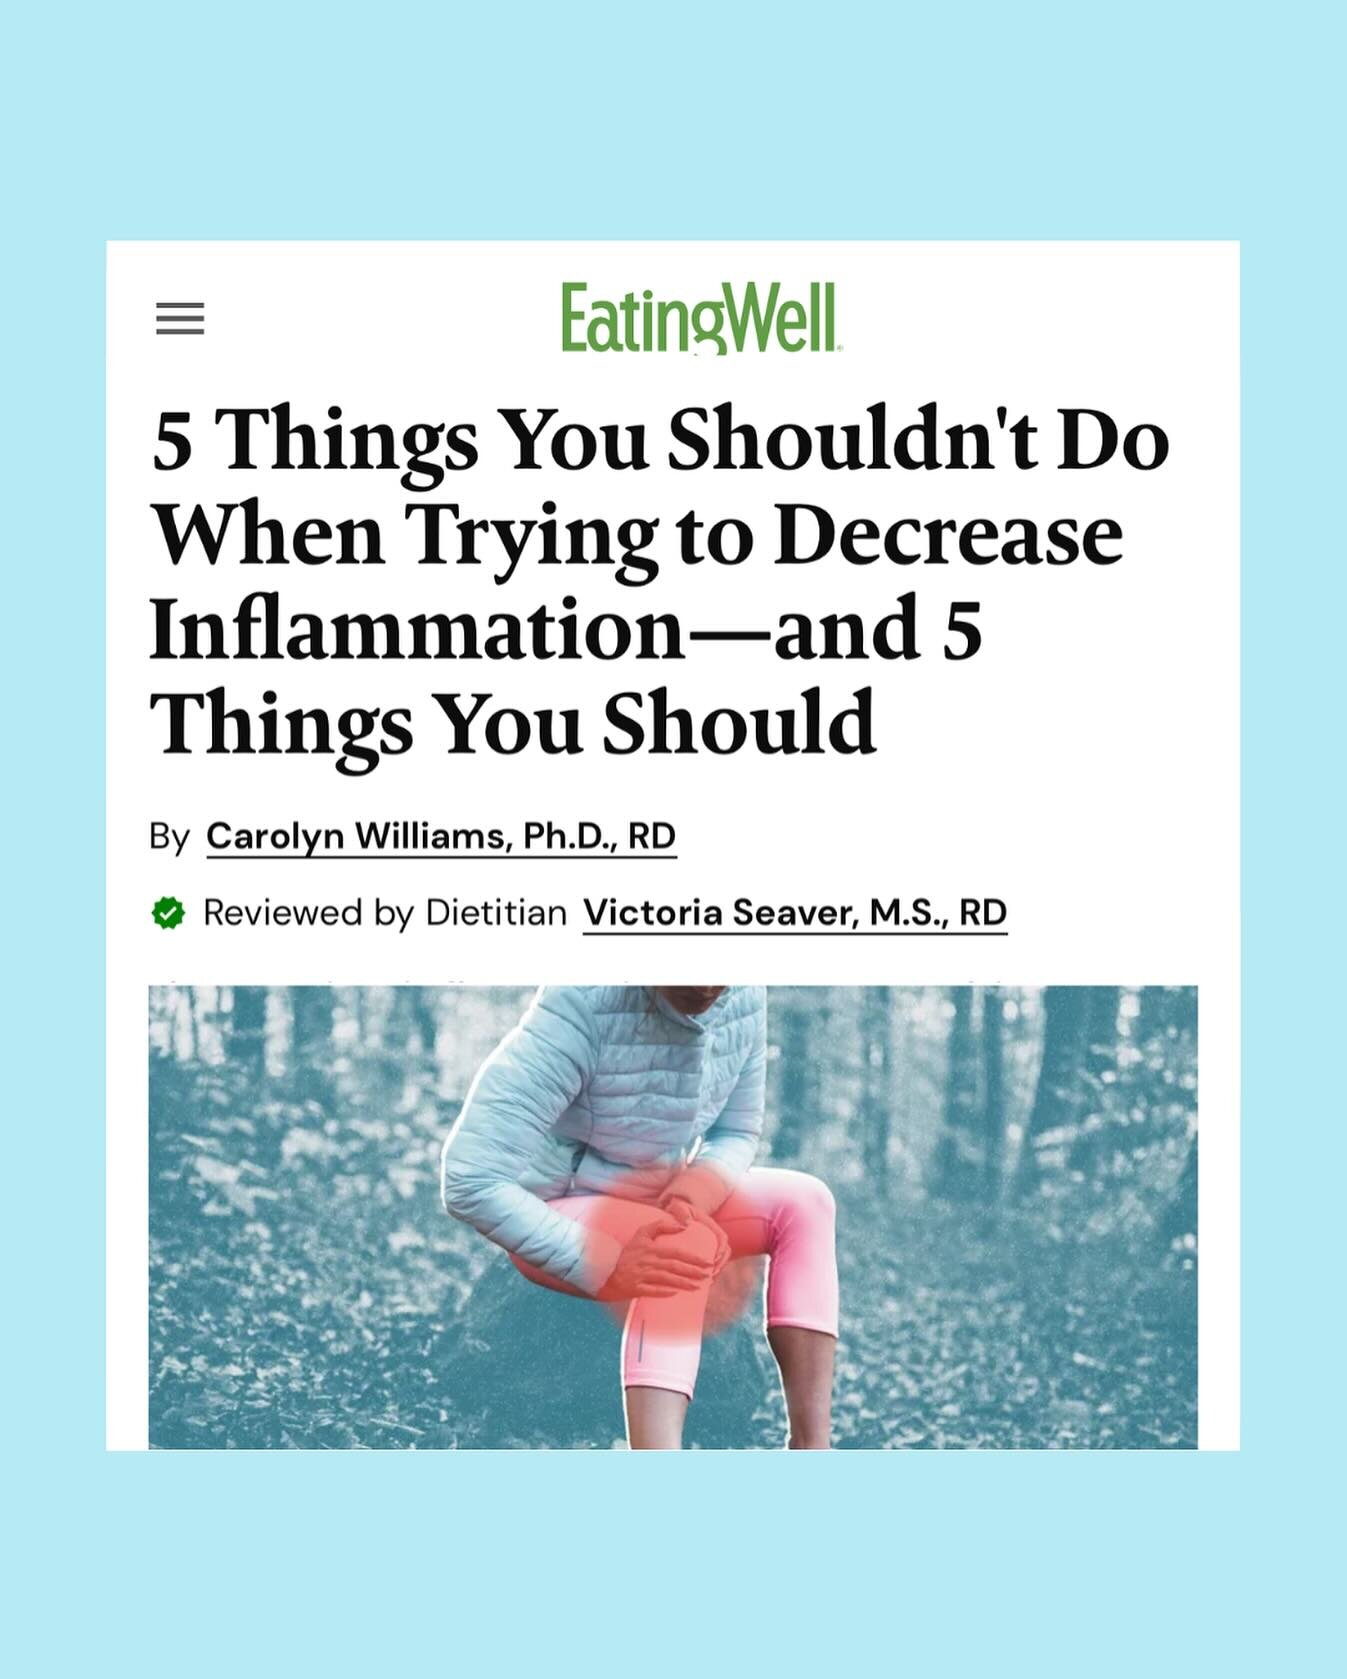 Decreasing inflammation means calming the body through diet and lifestyle. But there are a few things that - while they may sound good &ndash; don&rsquo;t really help. 
&nbsp;
Want to find out what 5 things you shouldn&rsquo;t do and 5 things you sho